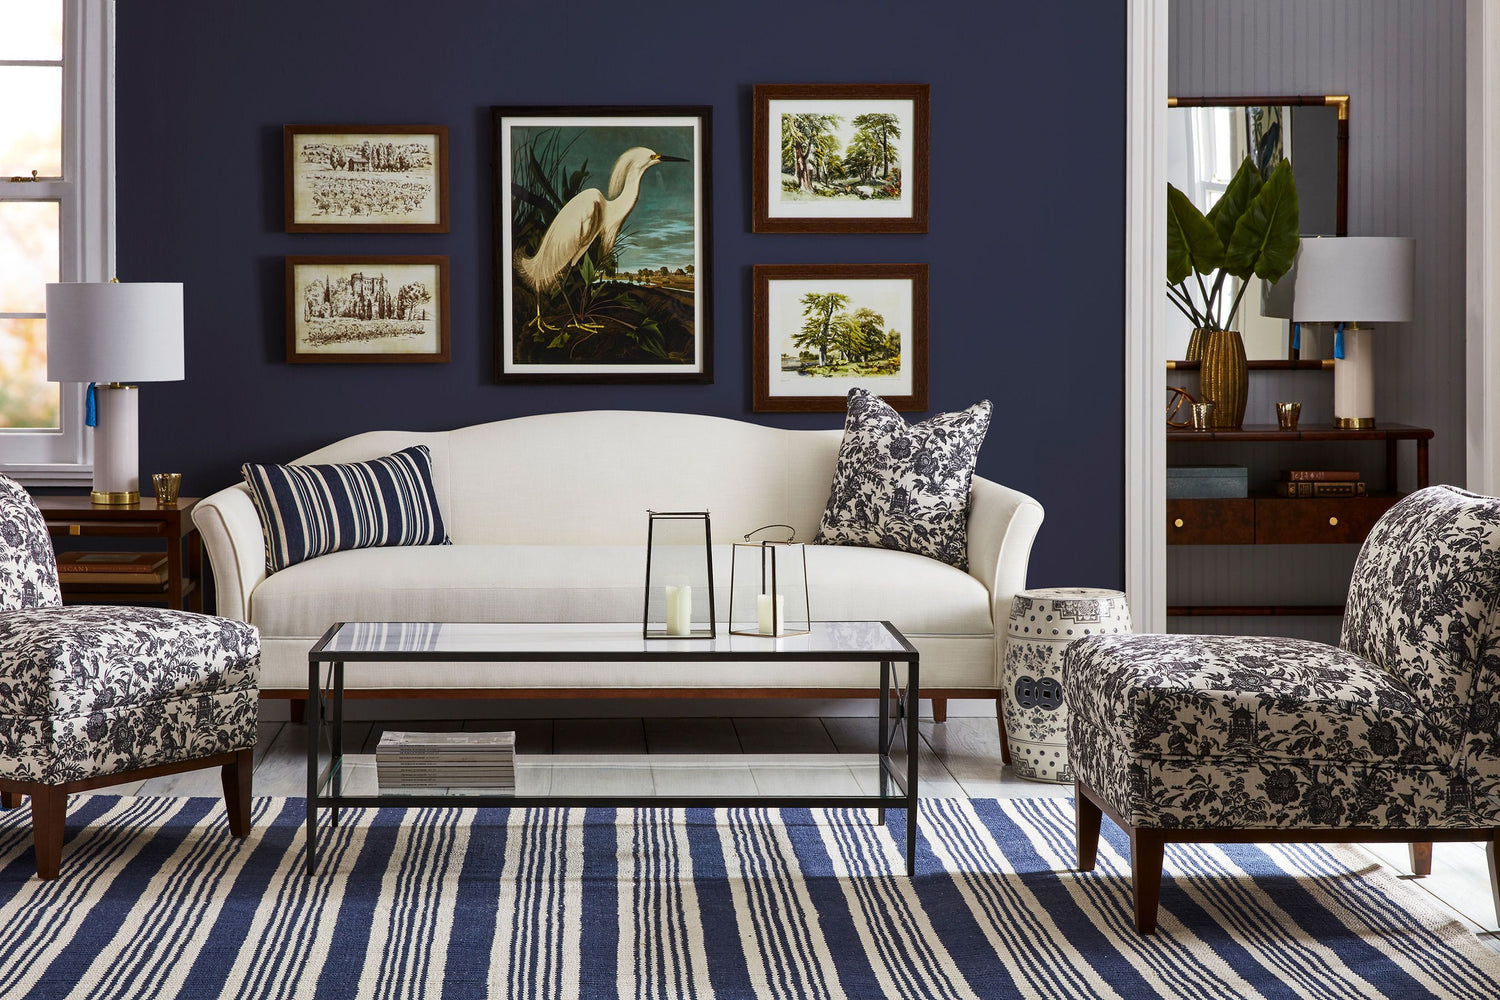 A stylish living room with a white sofa, flanked by two blue-white patterned chairs. A glass coffee table sits on a blue and white striped rug. Navy blue walls feature framed art, including a bird portrait. Lamps and decorative accents complete the look.